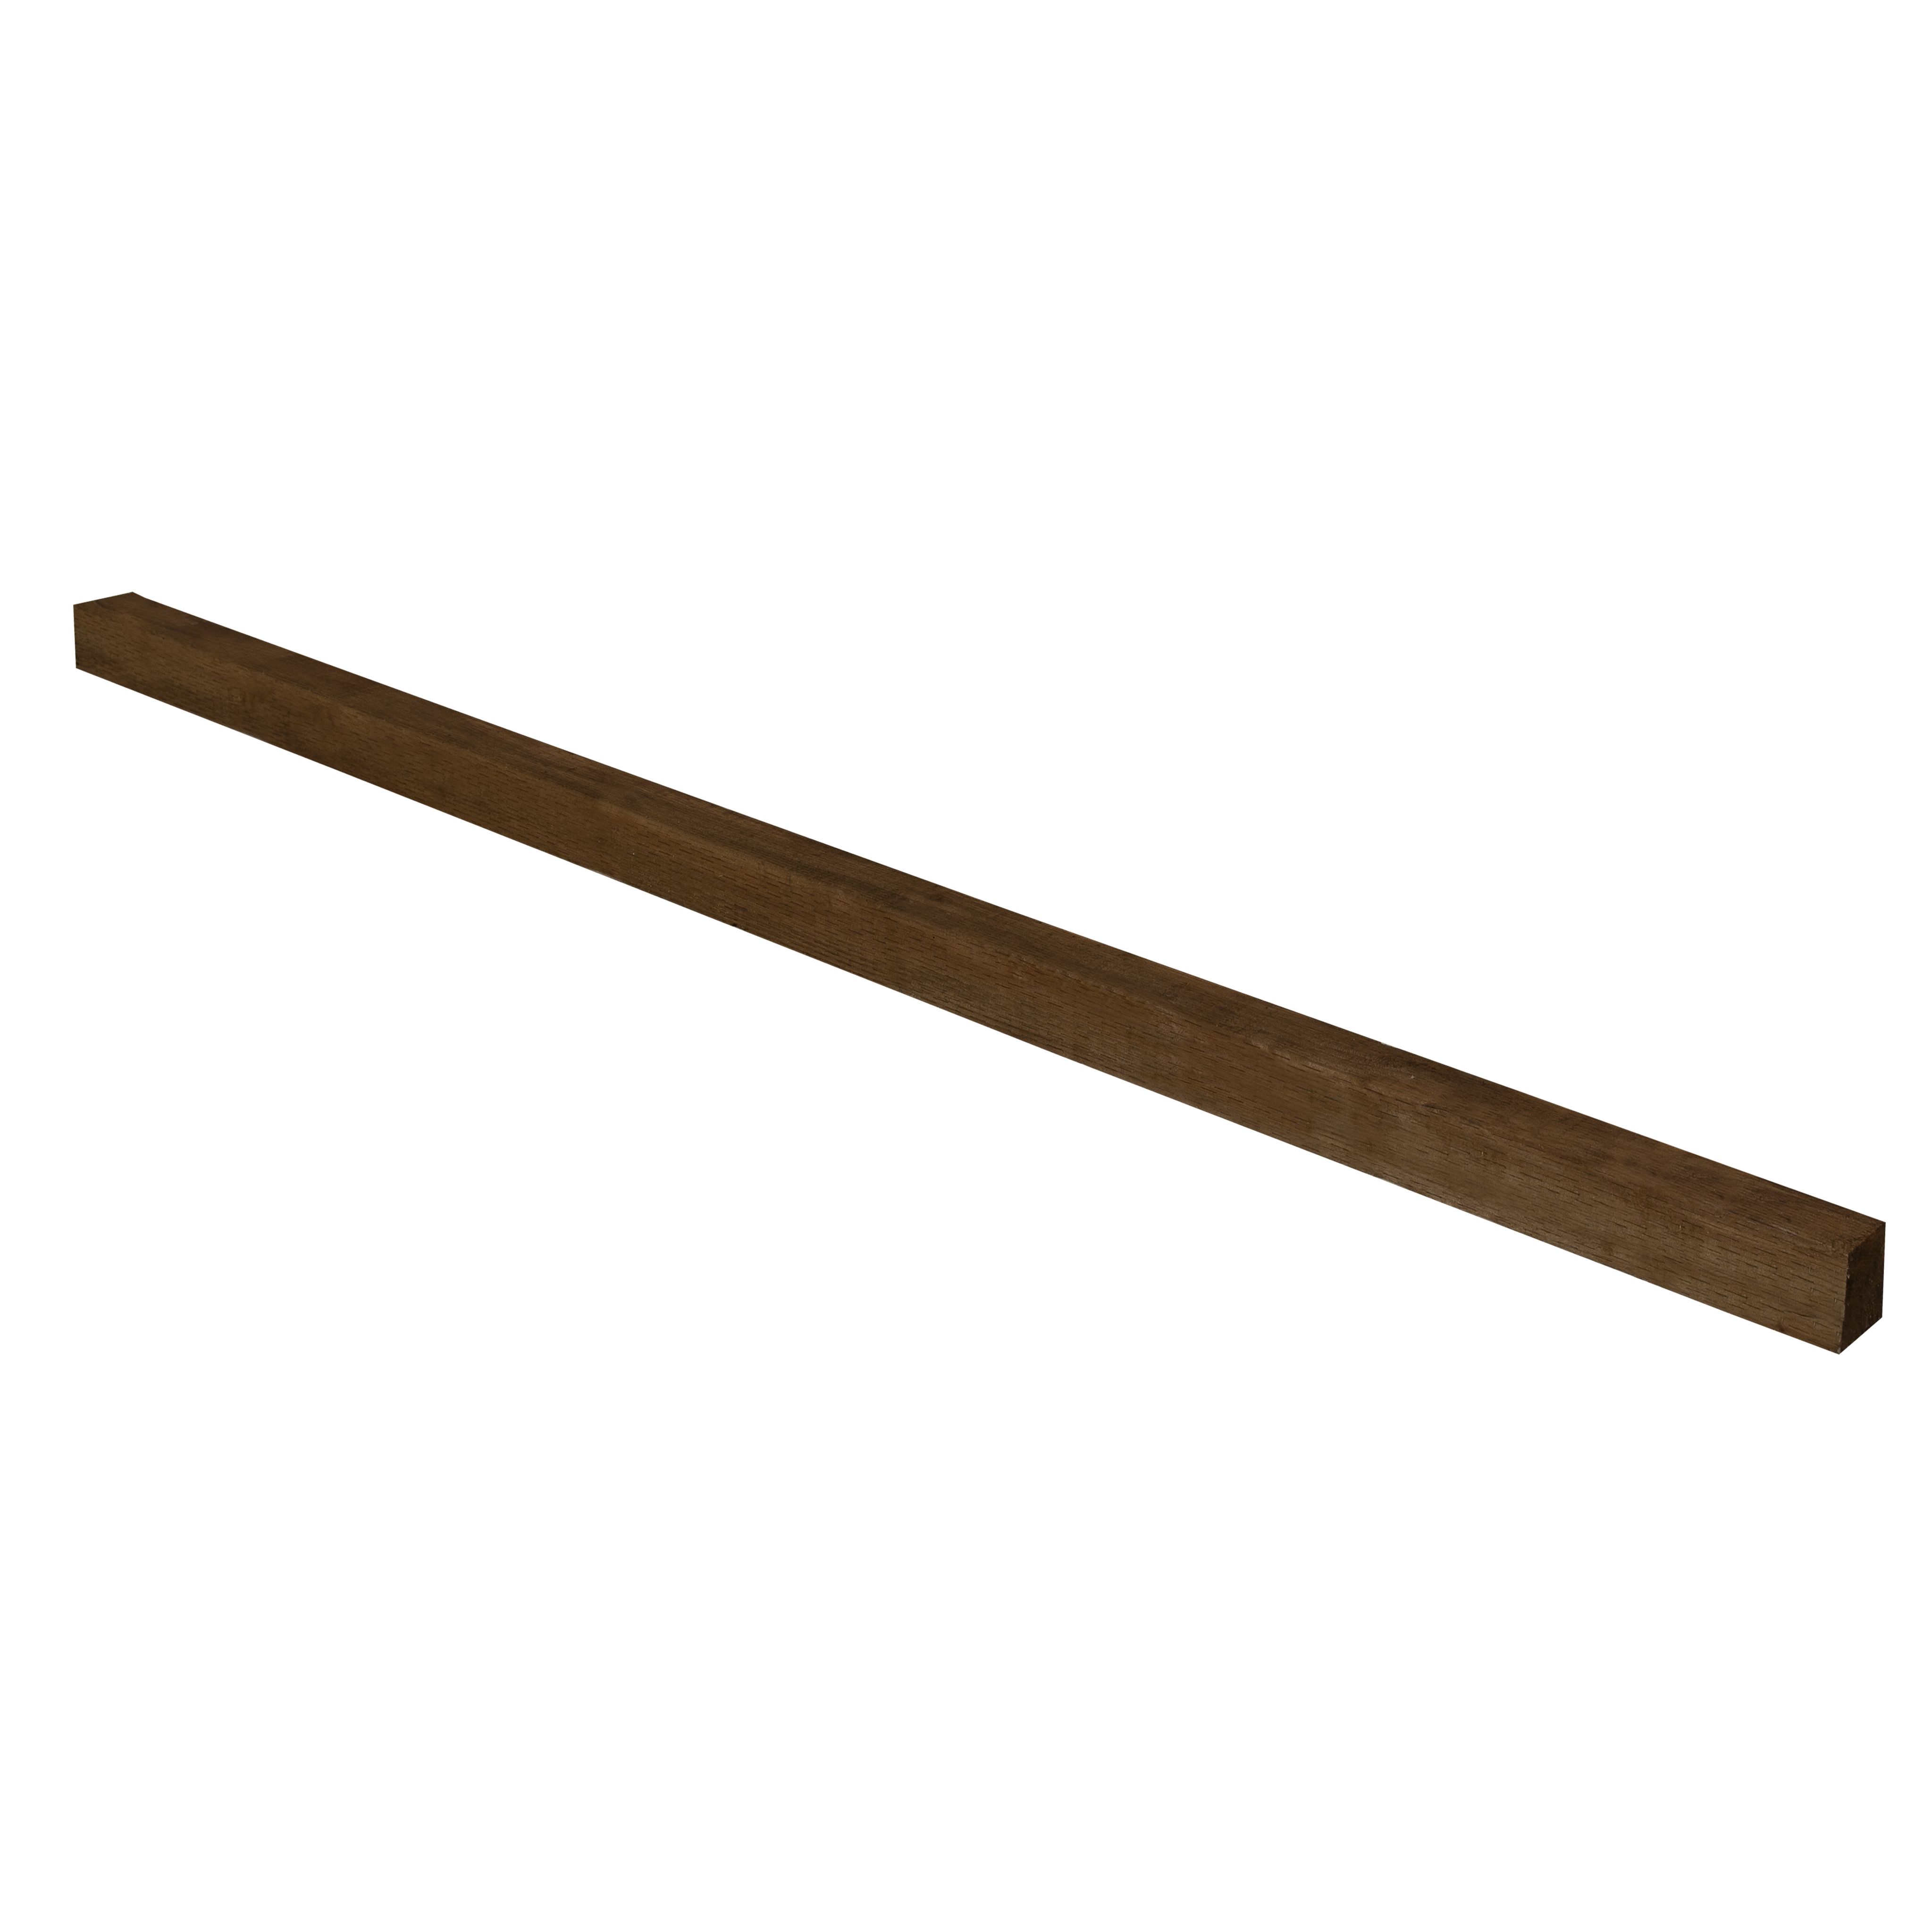 UC4 Brown Square Wooden Fence post (H)2.4m (W)75mm, Pack of 4